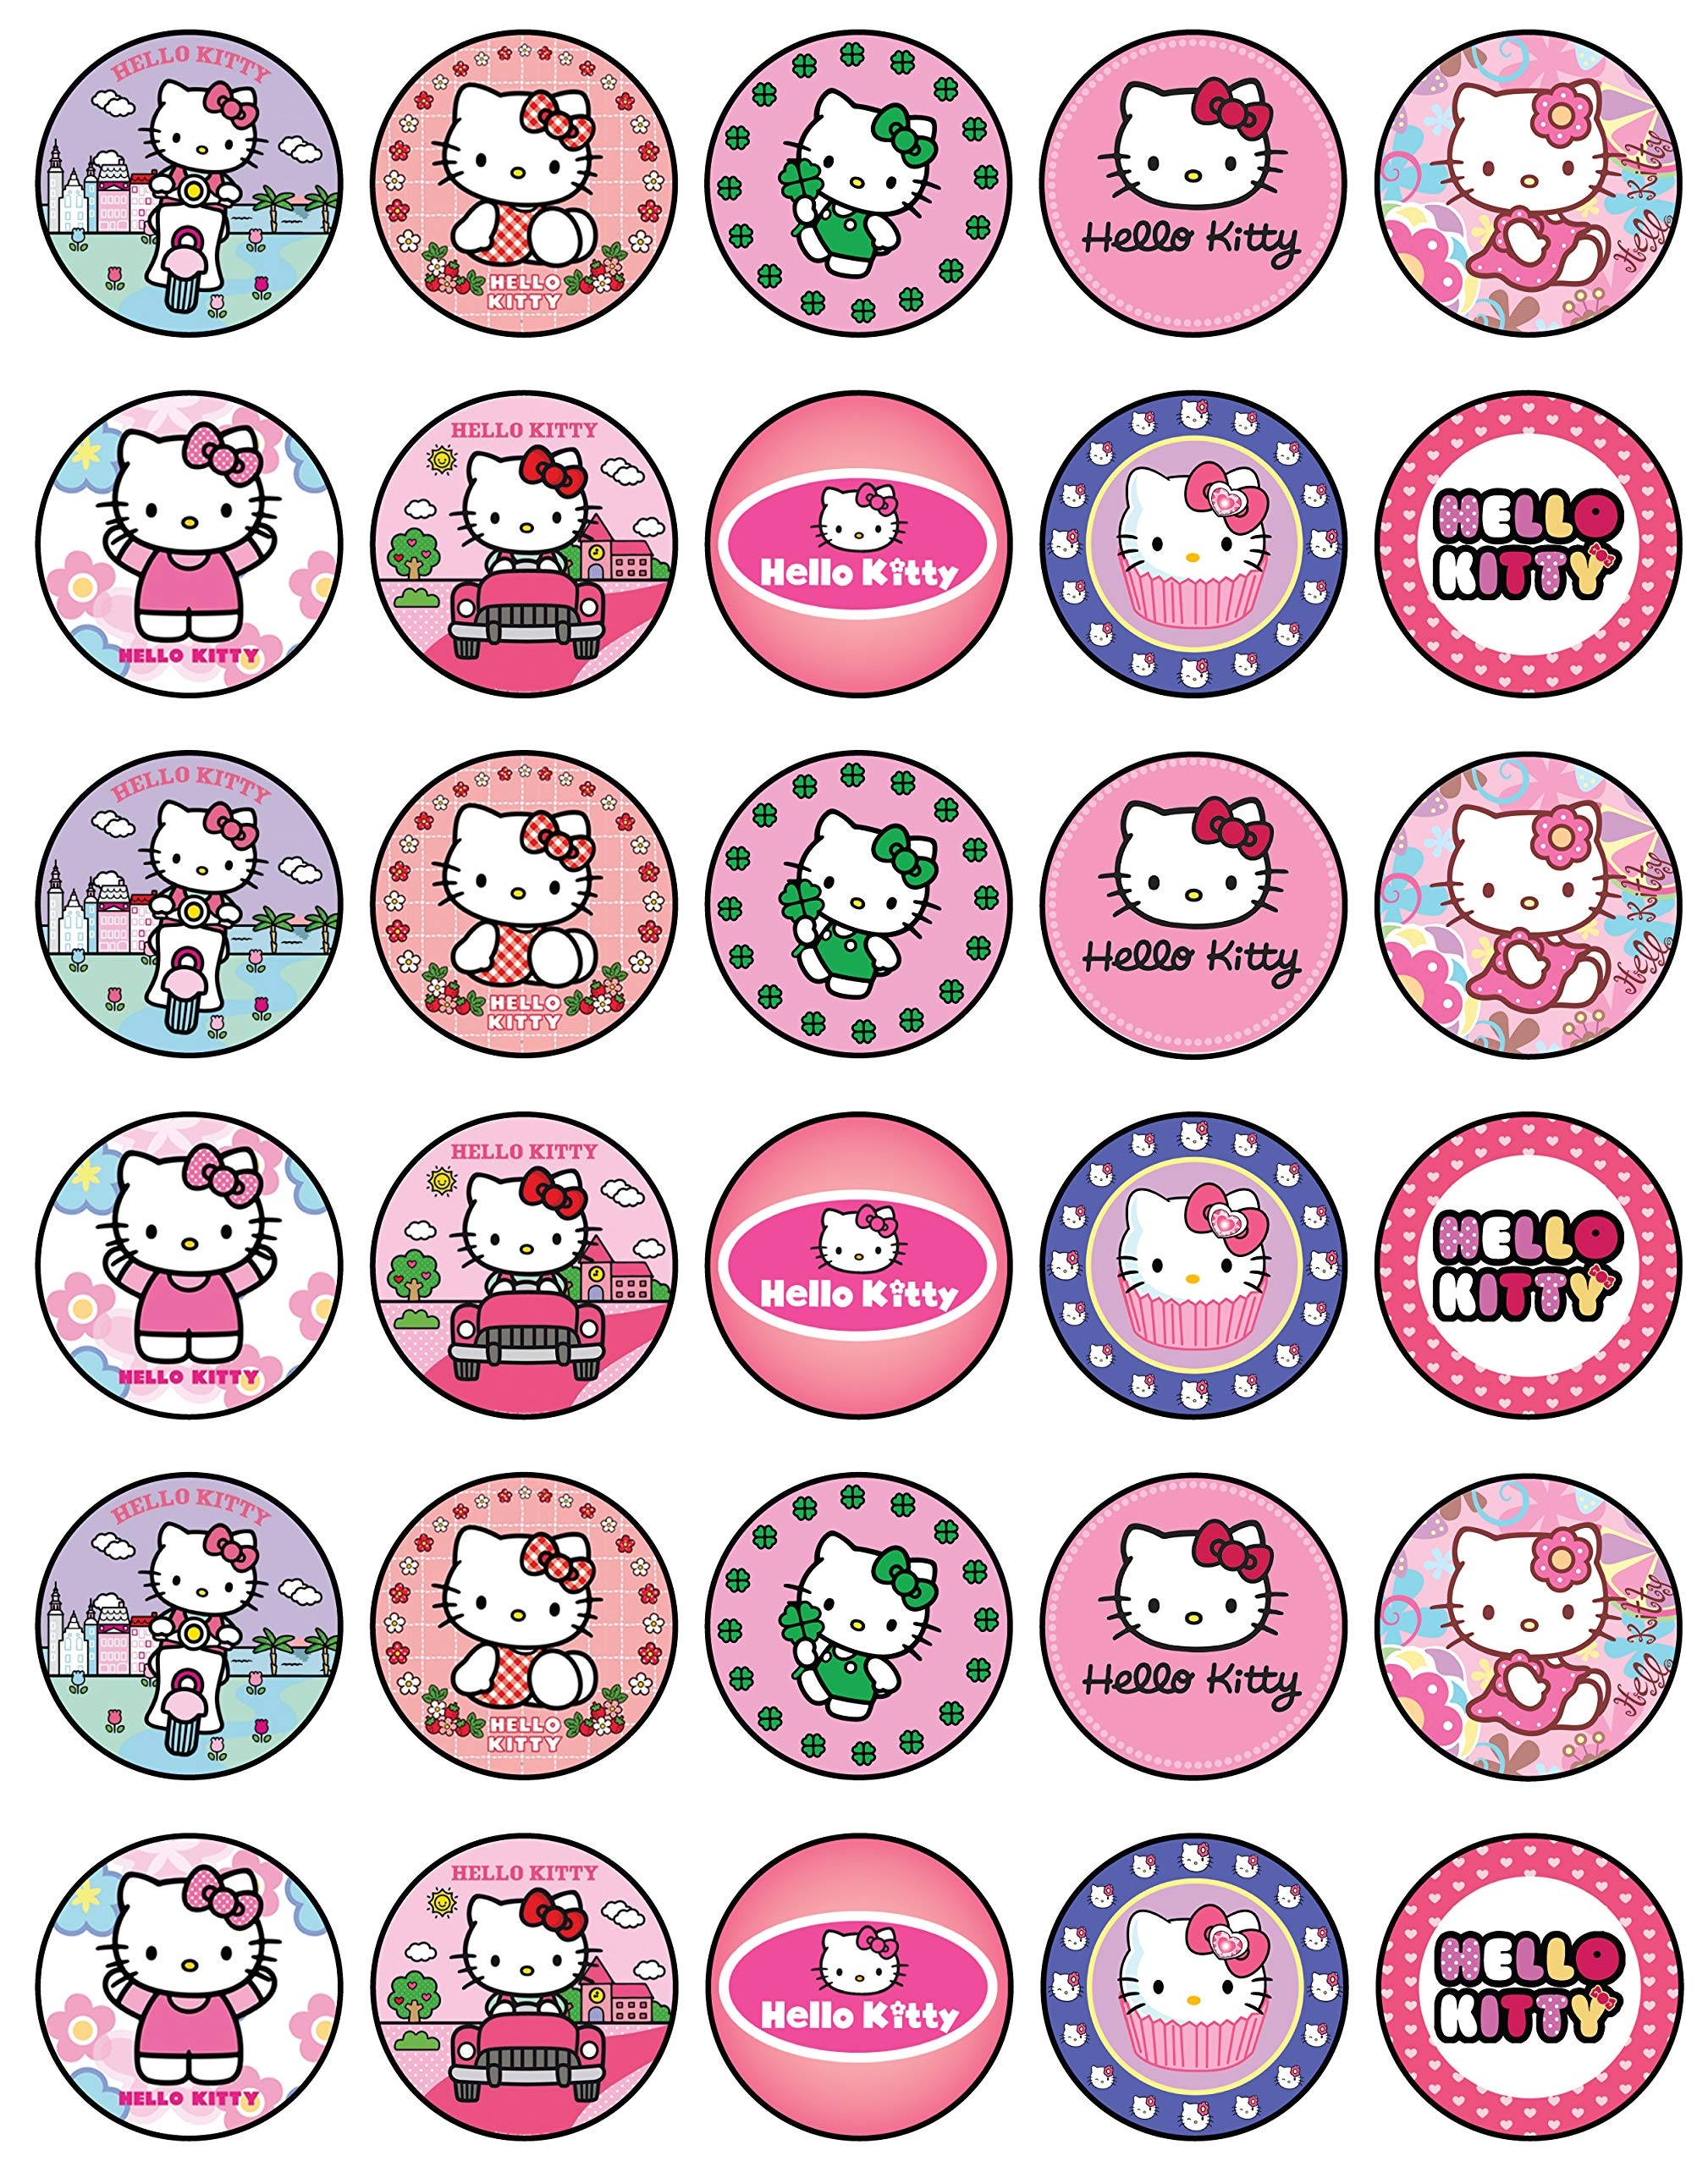 Amazon 30 X Edible Cupcake Toppers Themed Of Hello Kitty Party Collection Of Edible Cake Decorations Uncut Edible On Wafer Sheet Grocery Gourmet Food